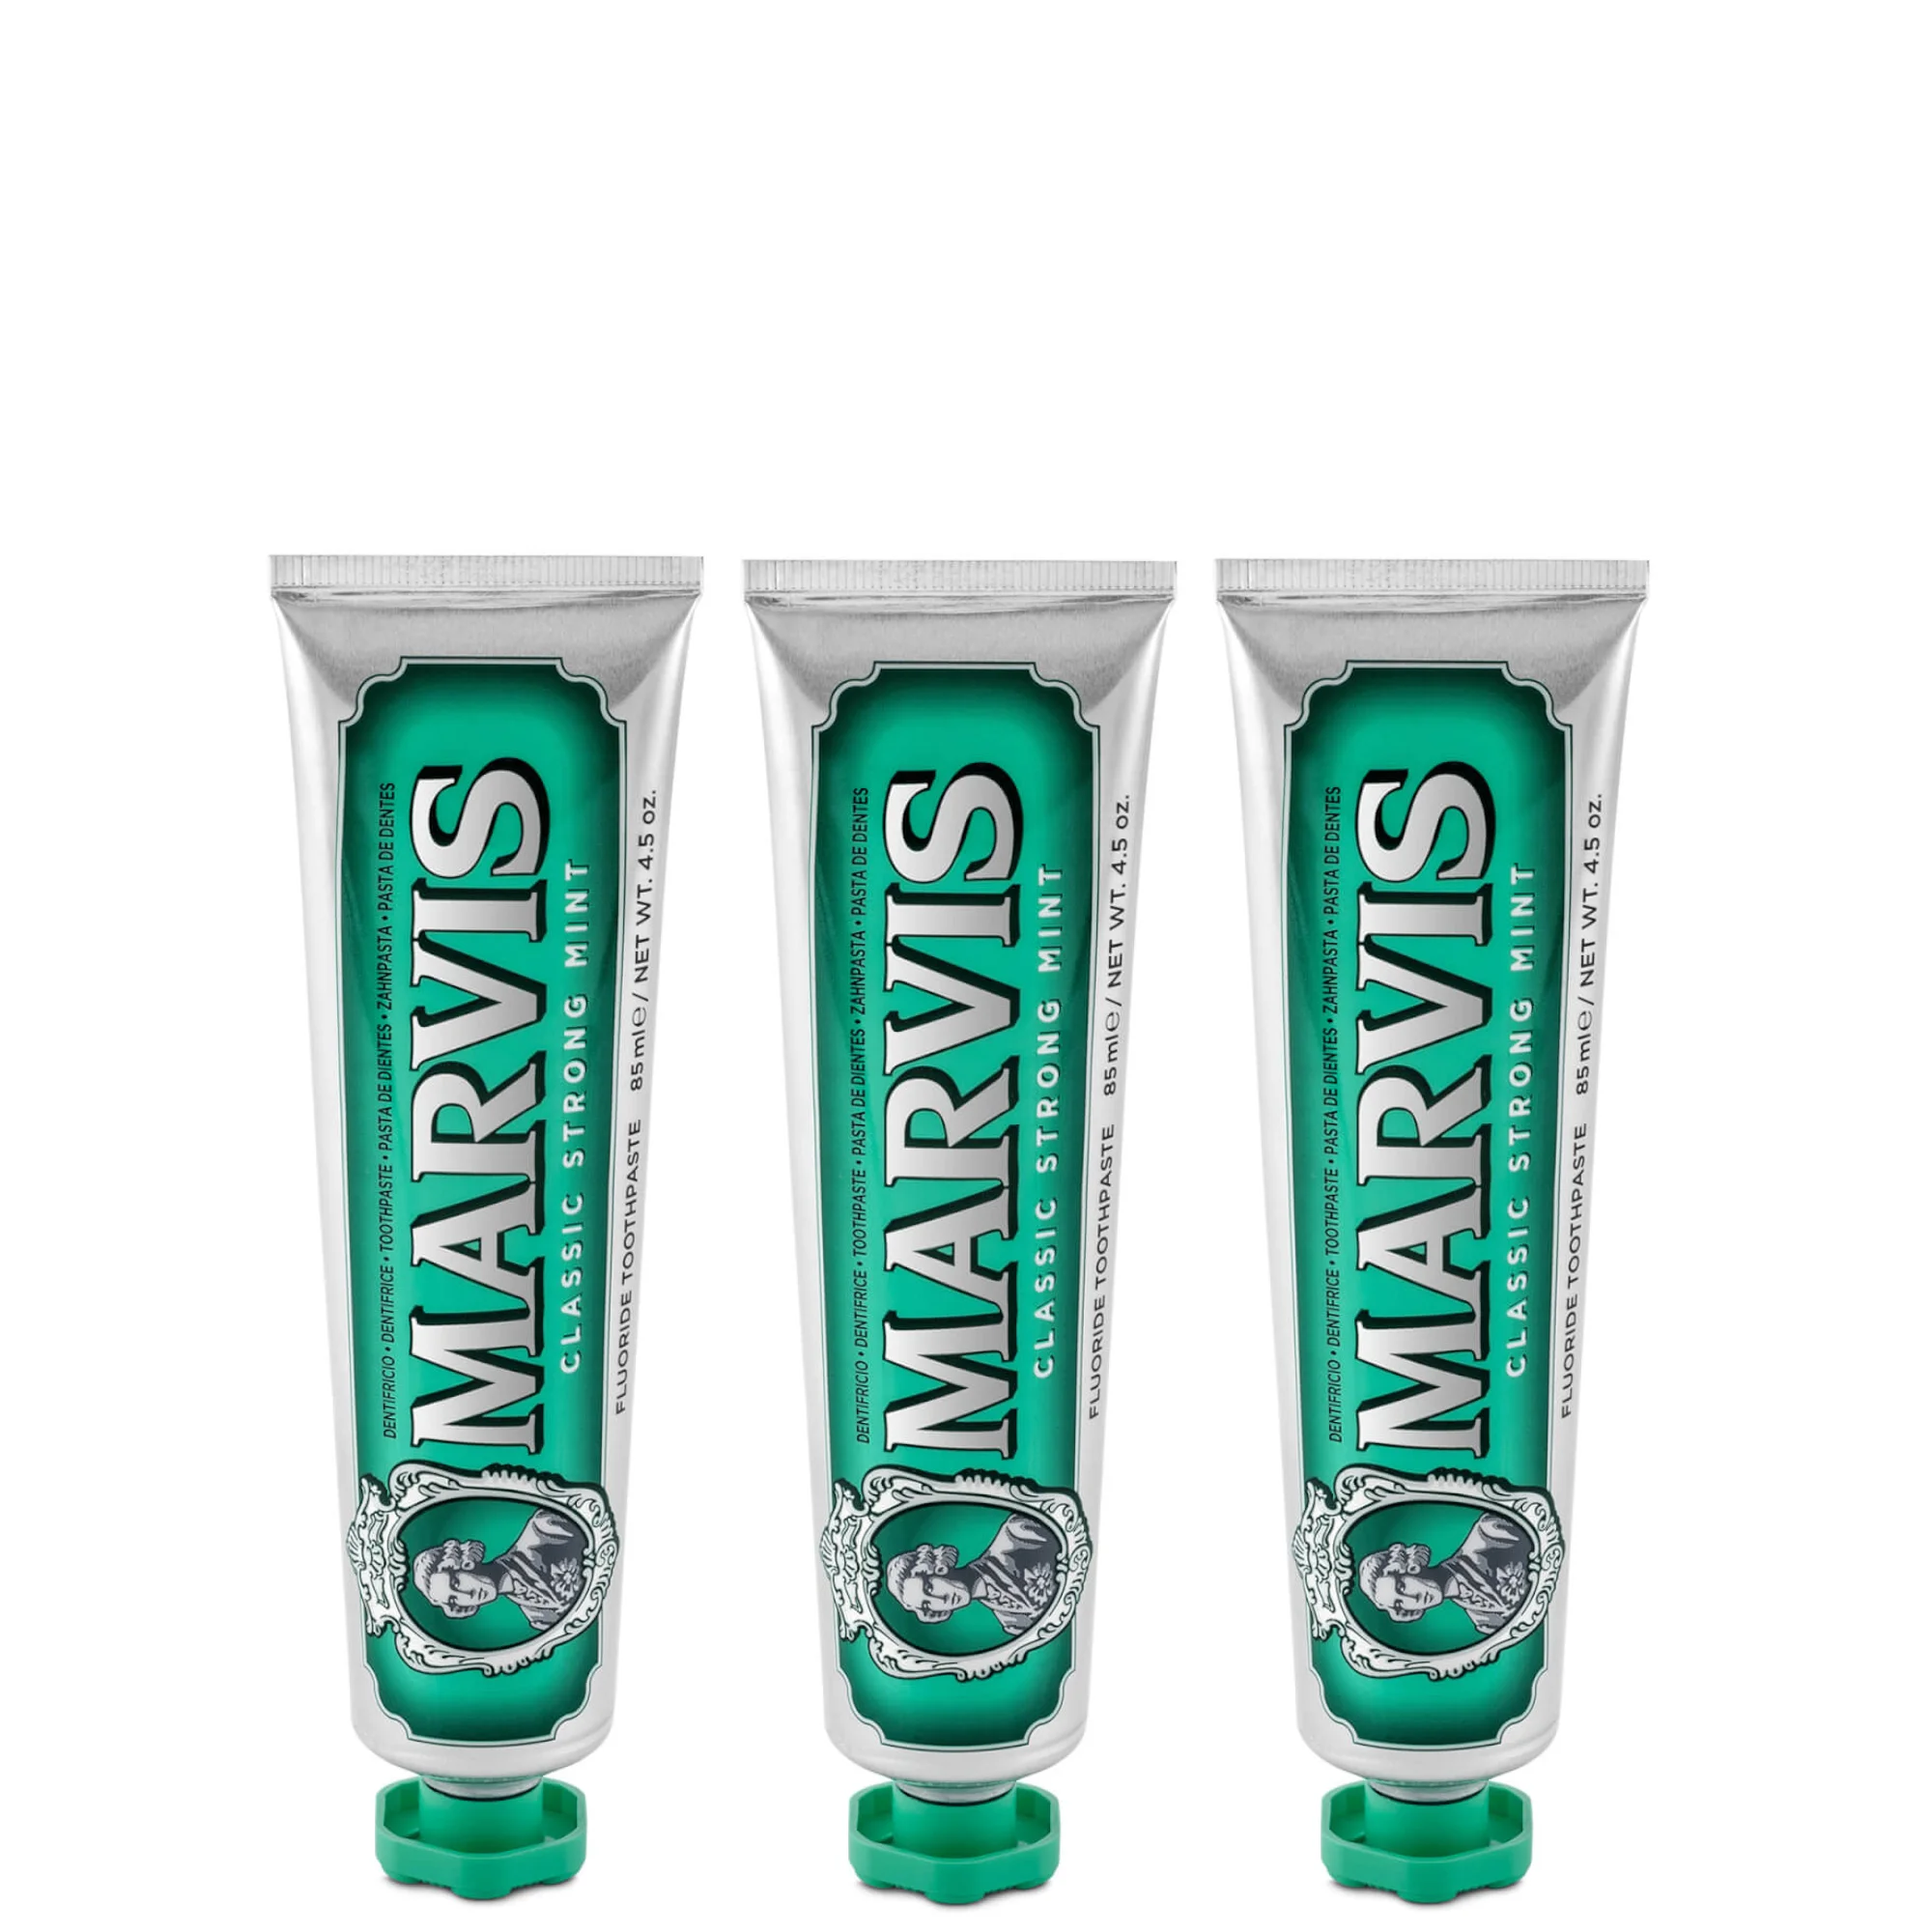 Marvis Classic Strong Mint Toothpaste Bundle (3x85ml) Image 1